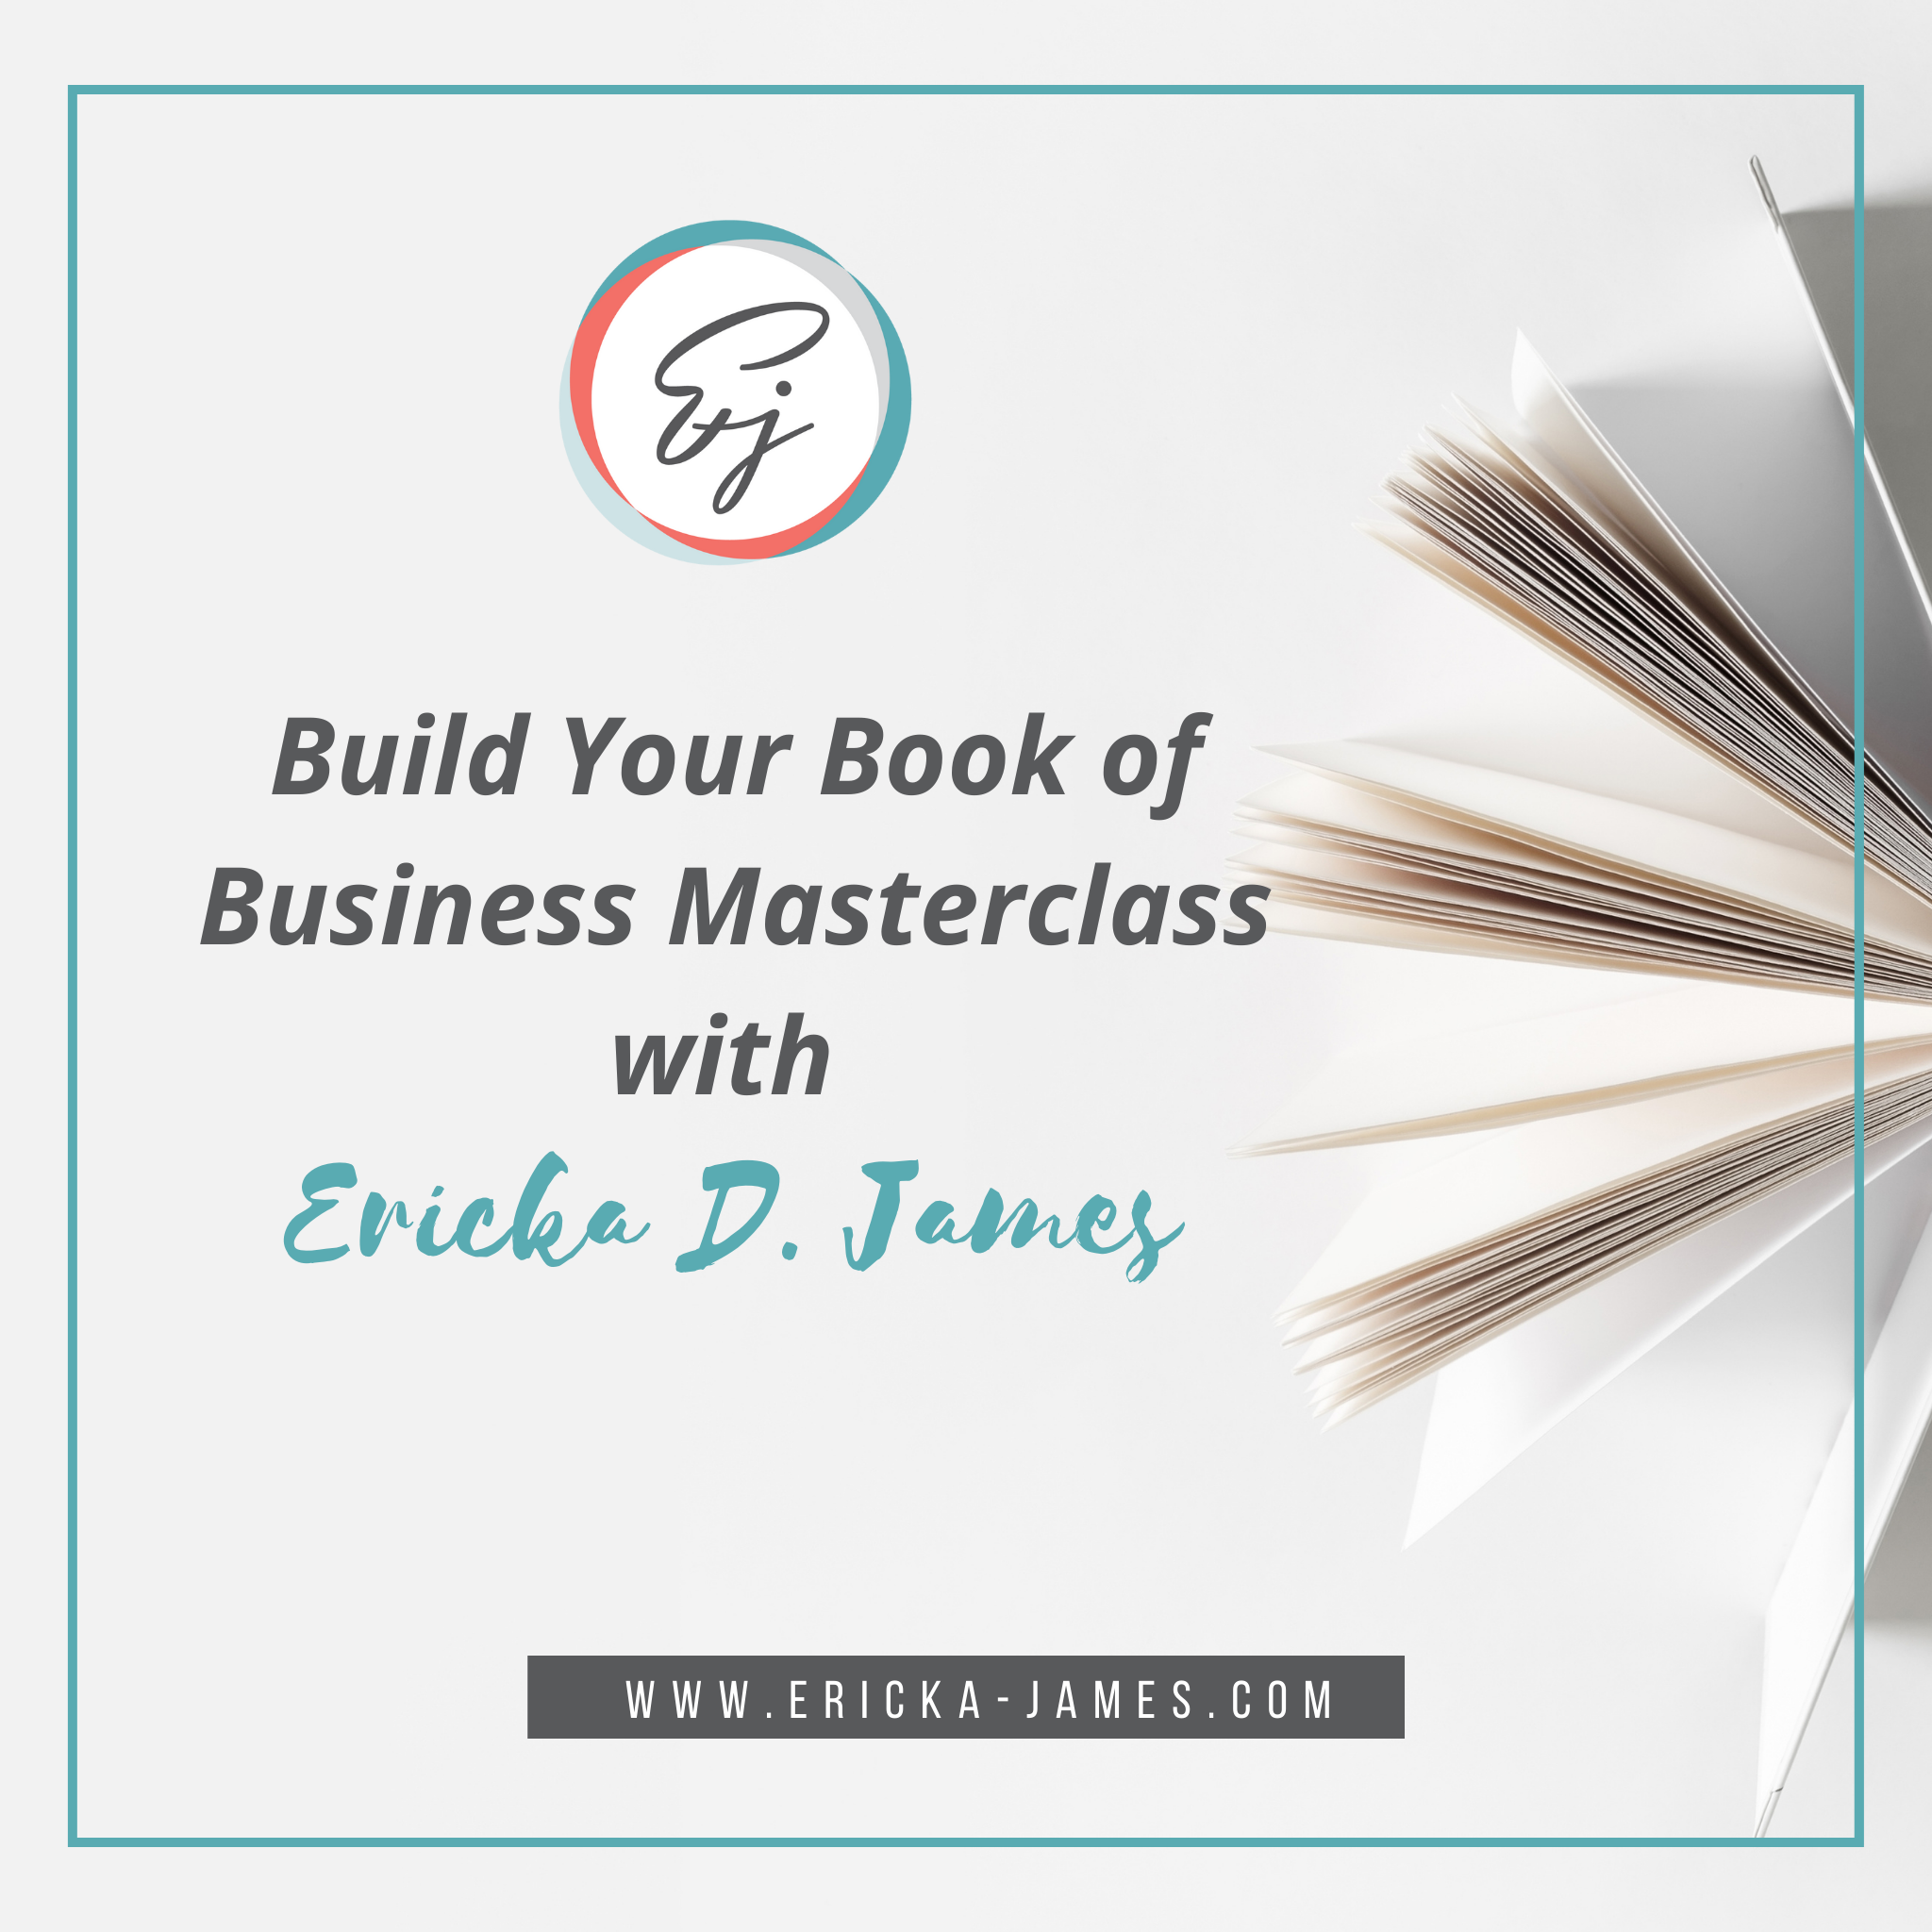 Build Your Book of Business Masterclass